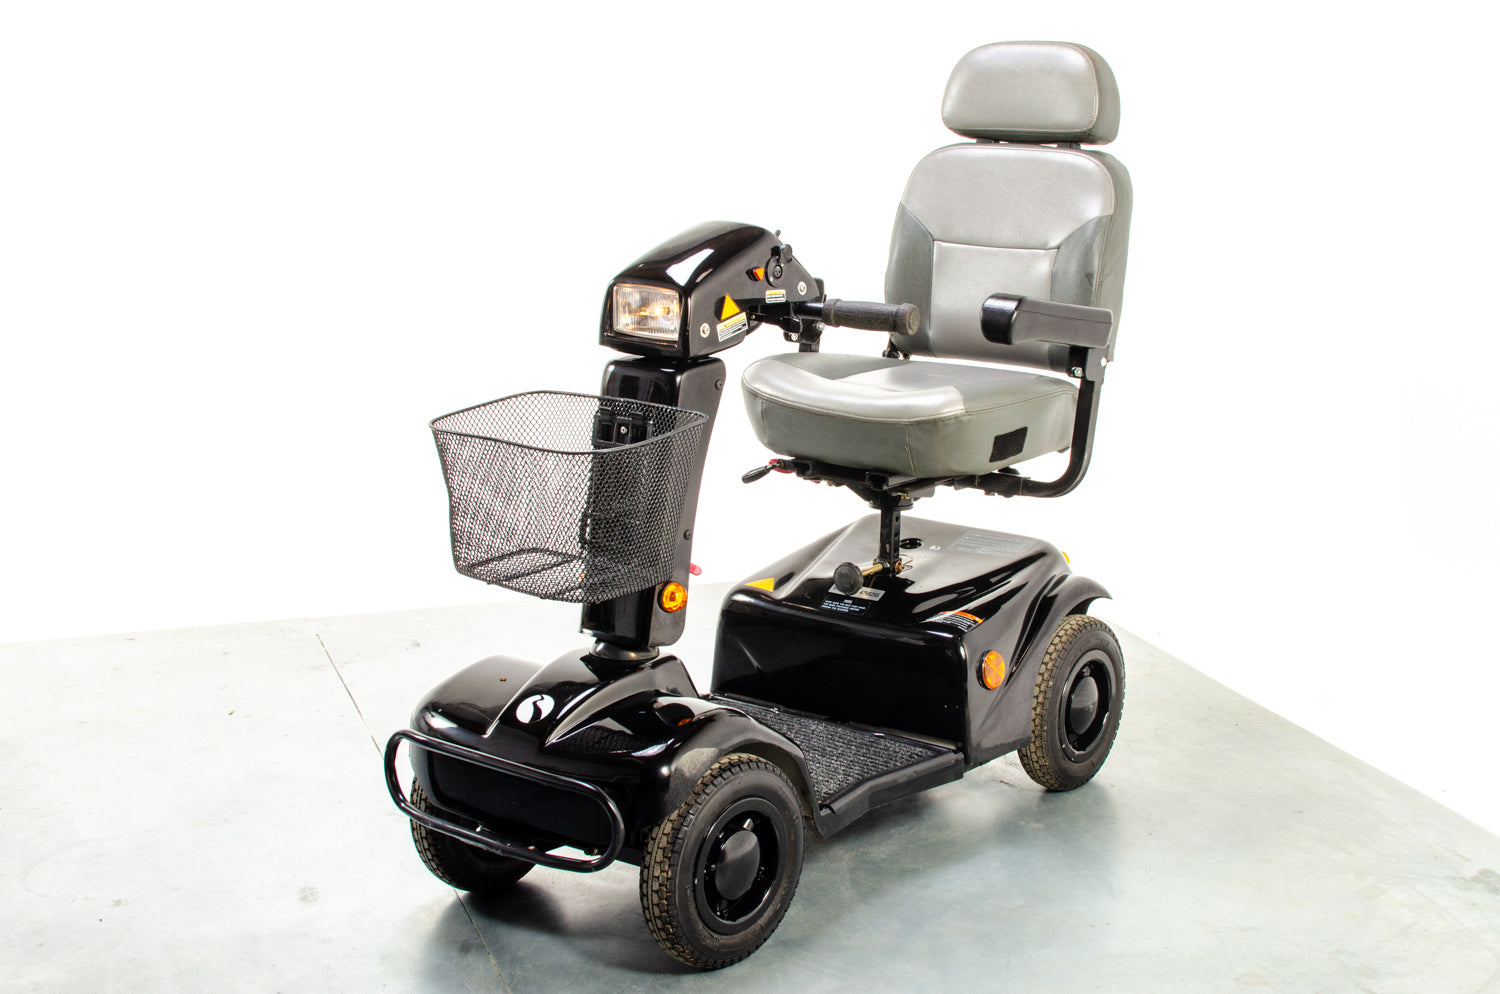 Rascal 388XL Used Electric Mobility Scooter 6mph Road Pavement Comfy